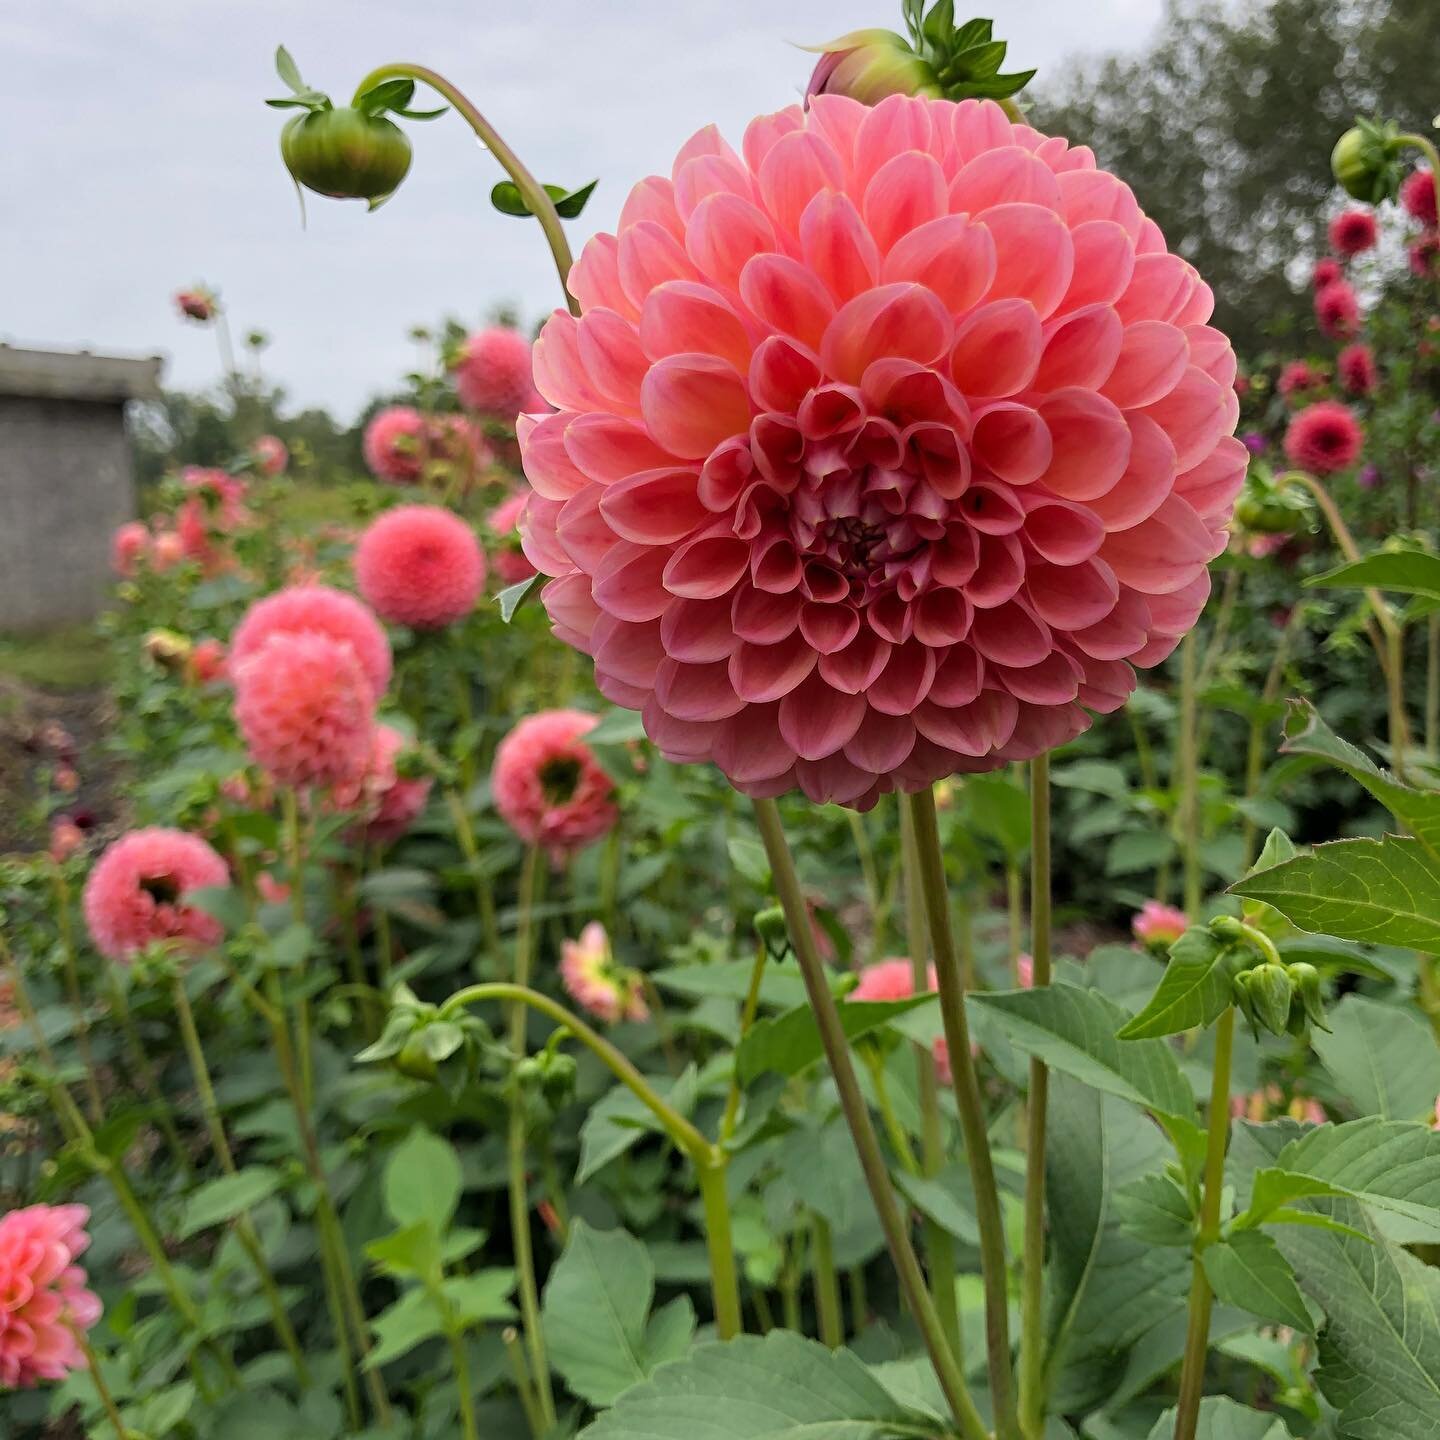 ✨Natalie G ✨.
.
.
💪 She&rsquo;s a workhorse in our cutting garden - and we never could complain about that peachy/ rose colour 🙌 🍑🌸.
.
.
#feederflowerfarm #dahlia #natalieg #cuttinggarden #flowerfarming #flowerfarm #peachflowers #wainfleet #farme